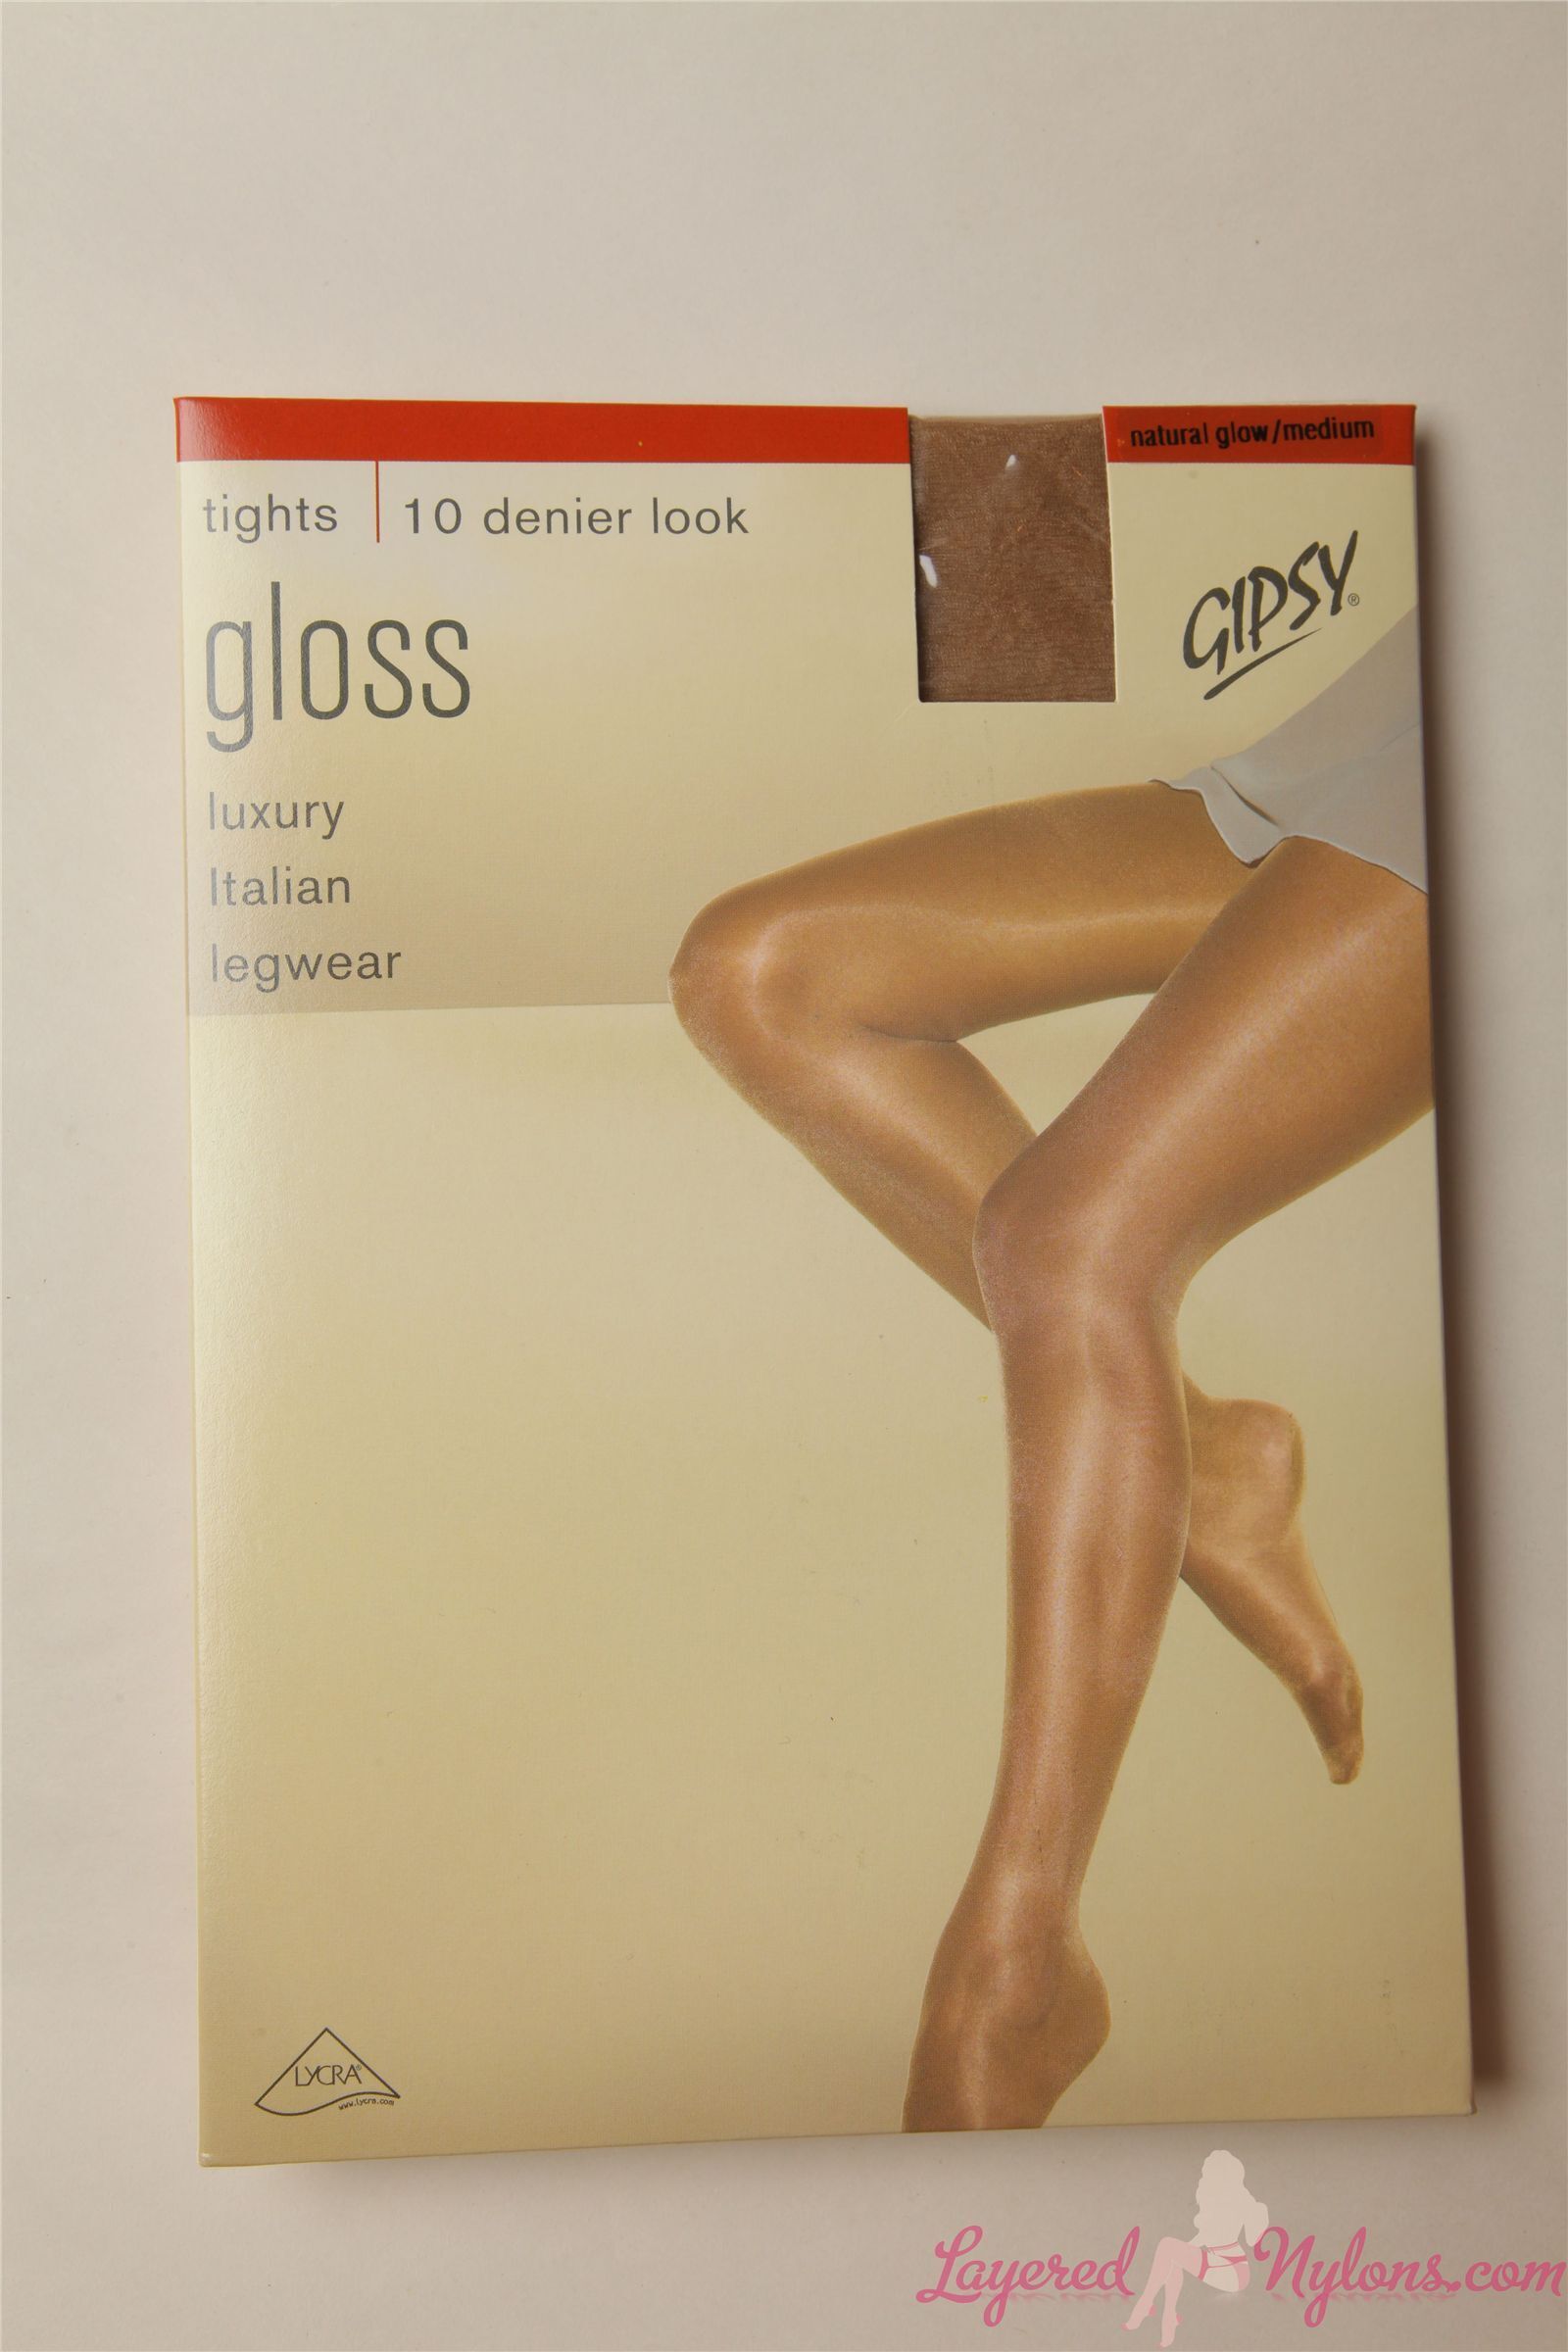 [layered nylons] December 5, 2011 brandy pictures of sexy silk stockings in Europe and America